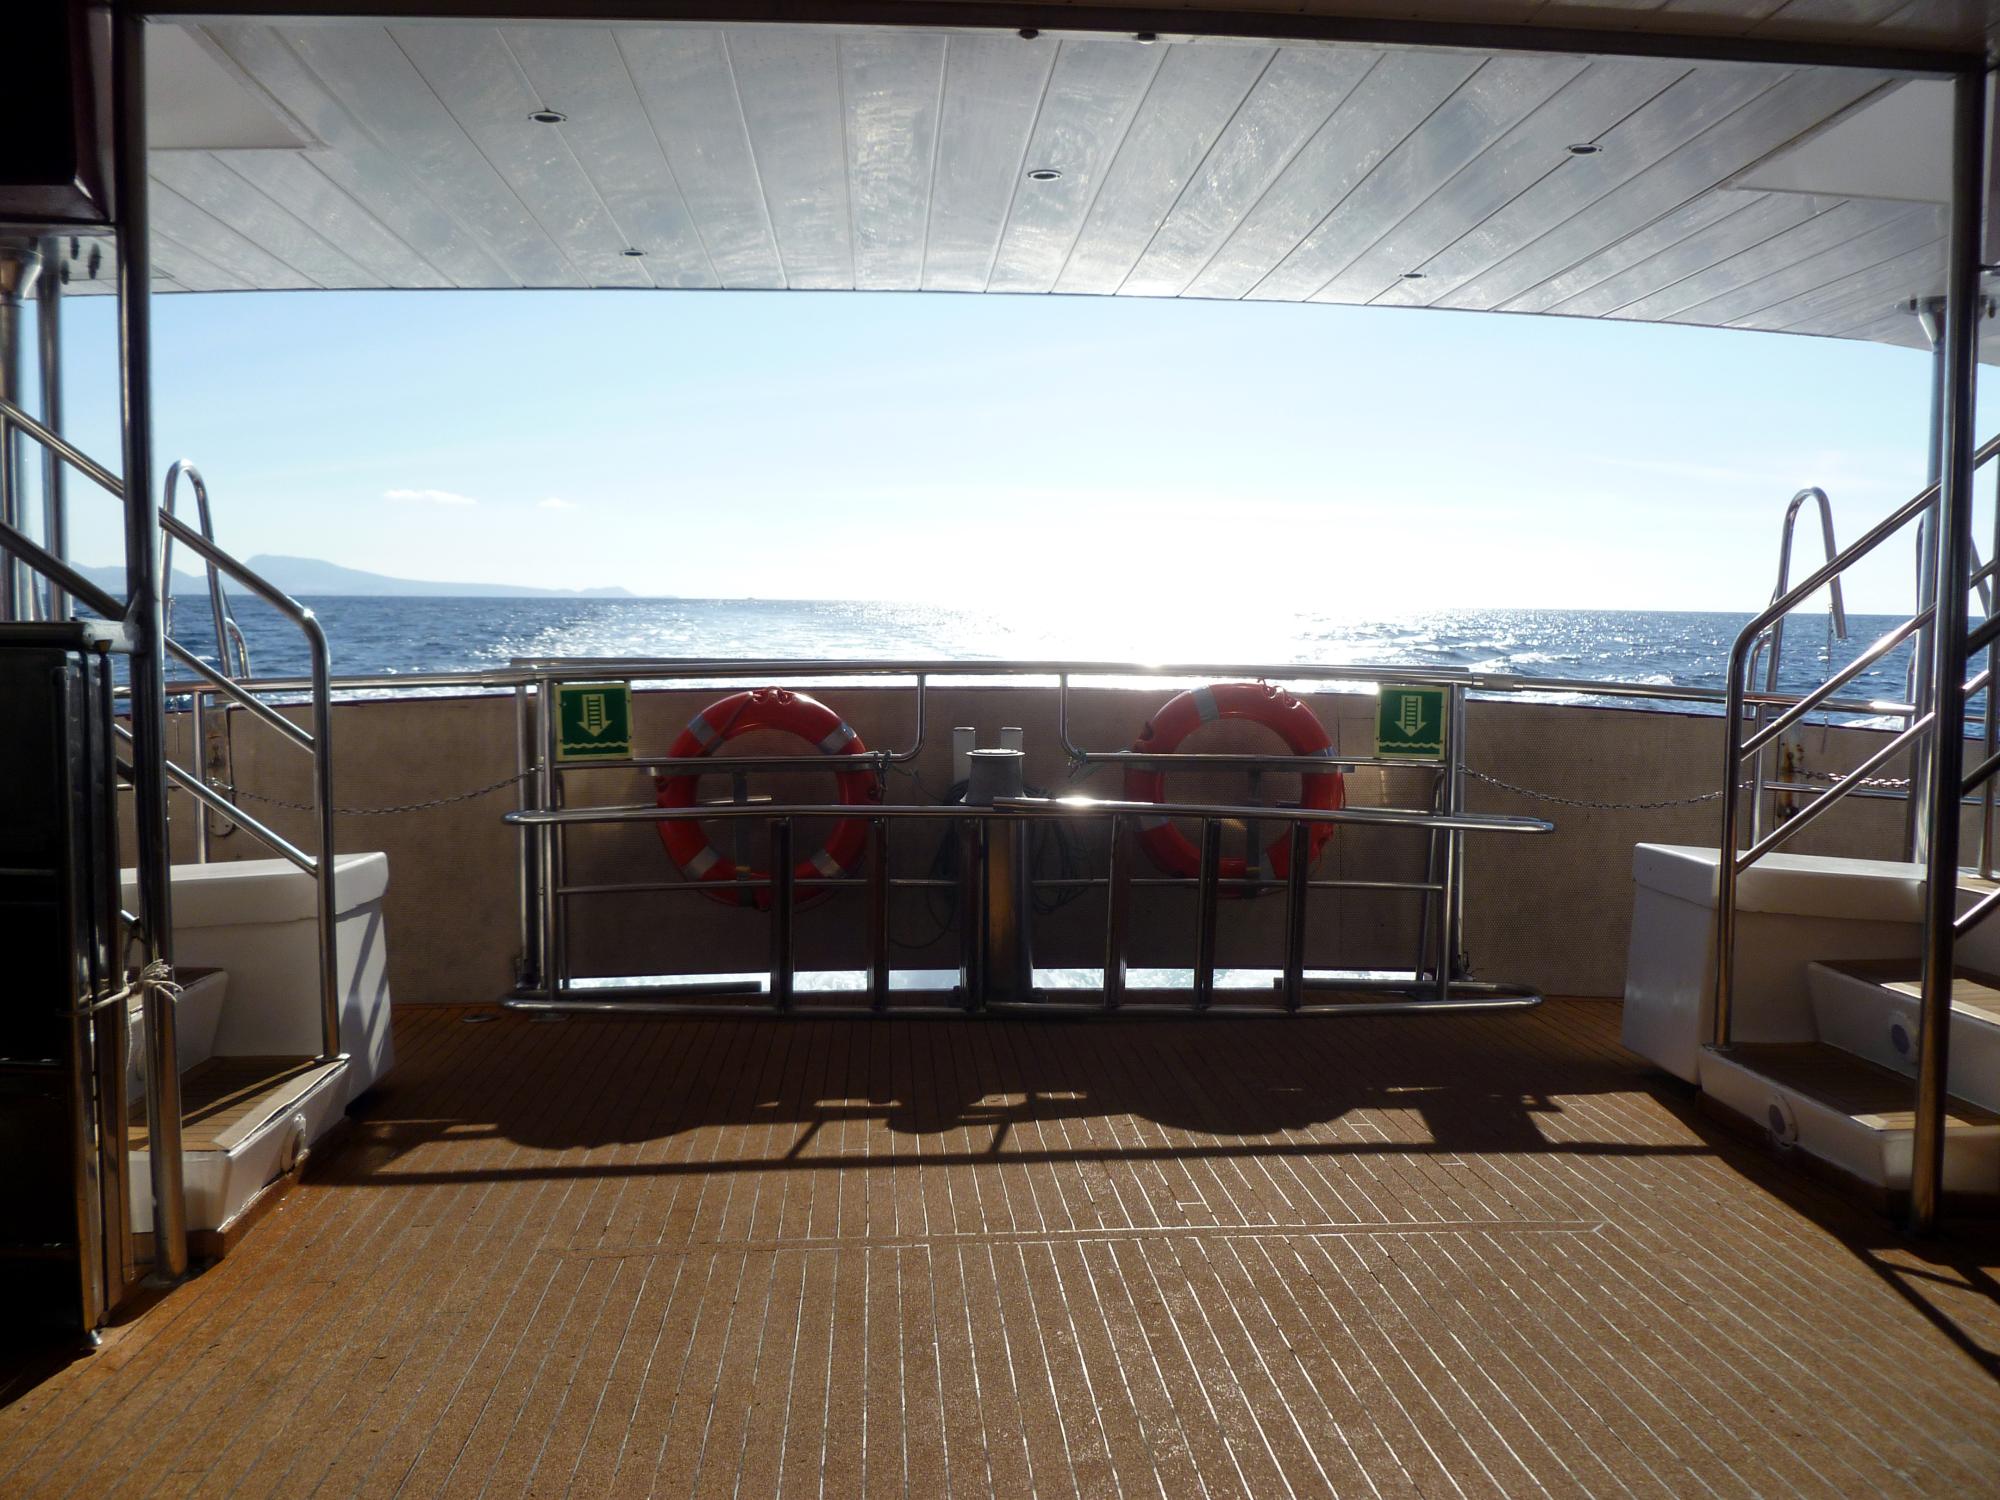  Canary Islands - Looking Aft